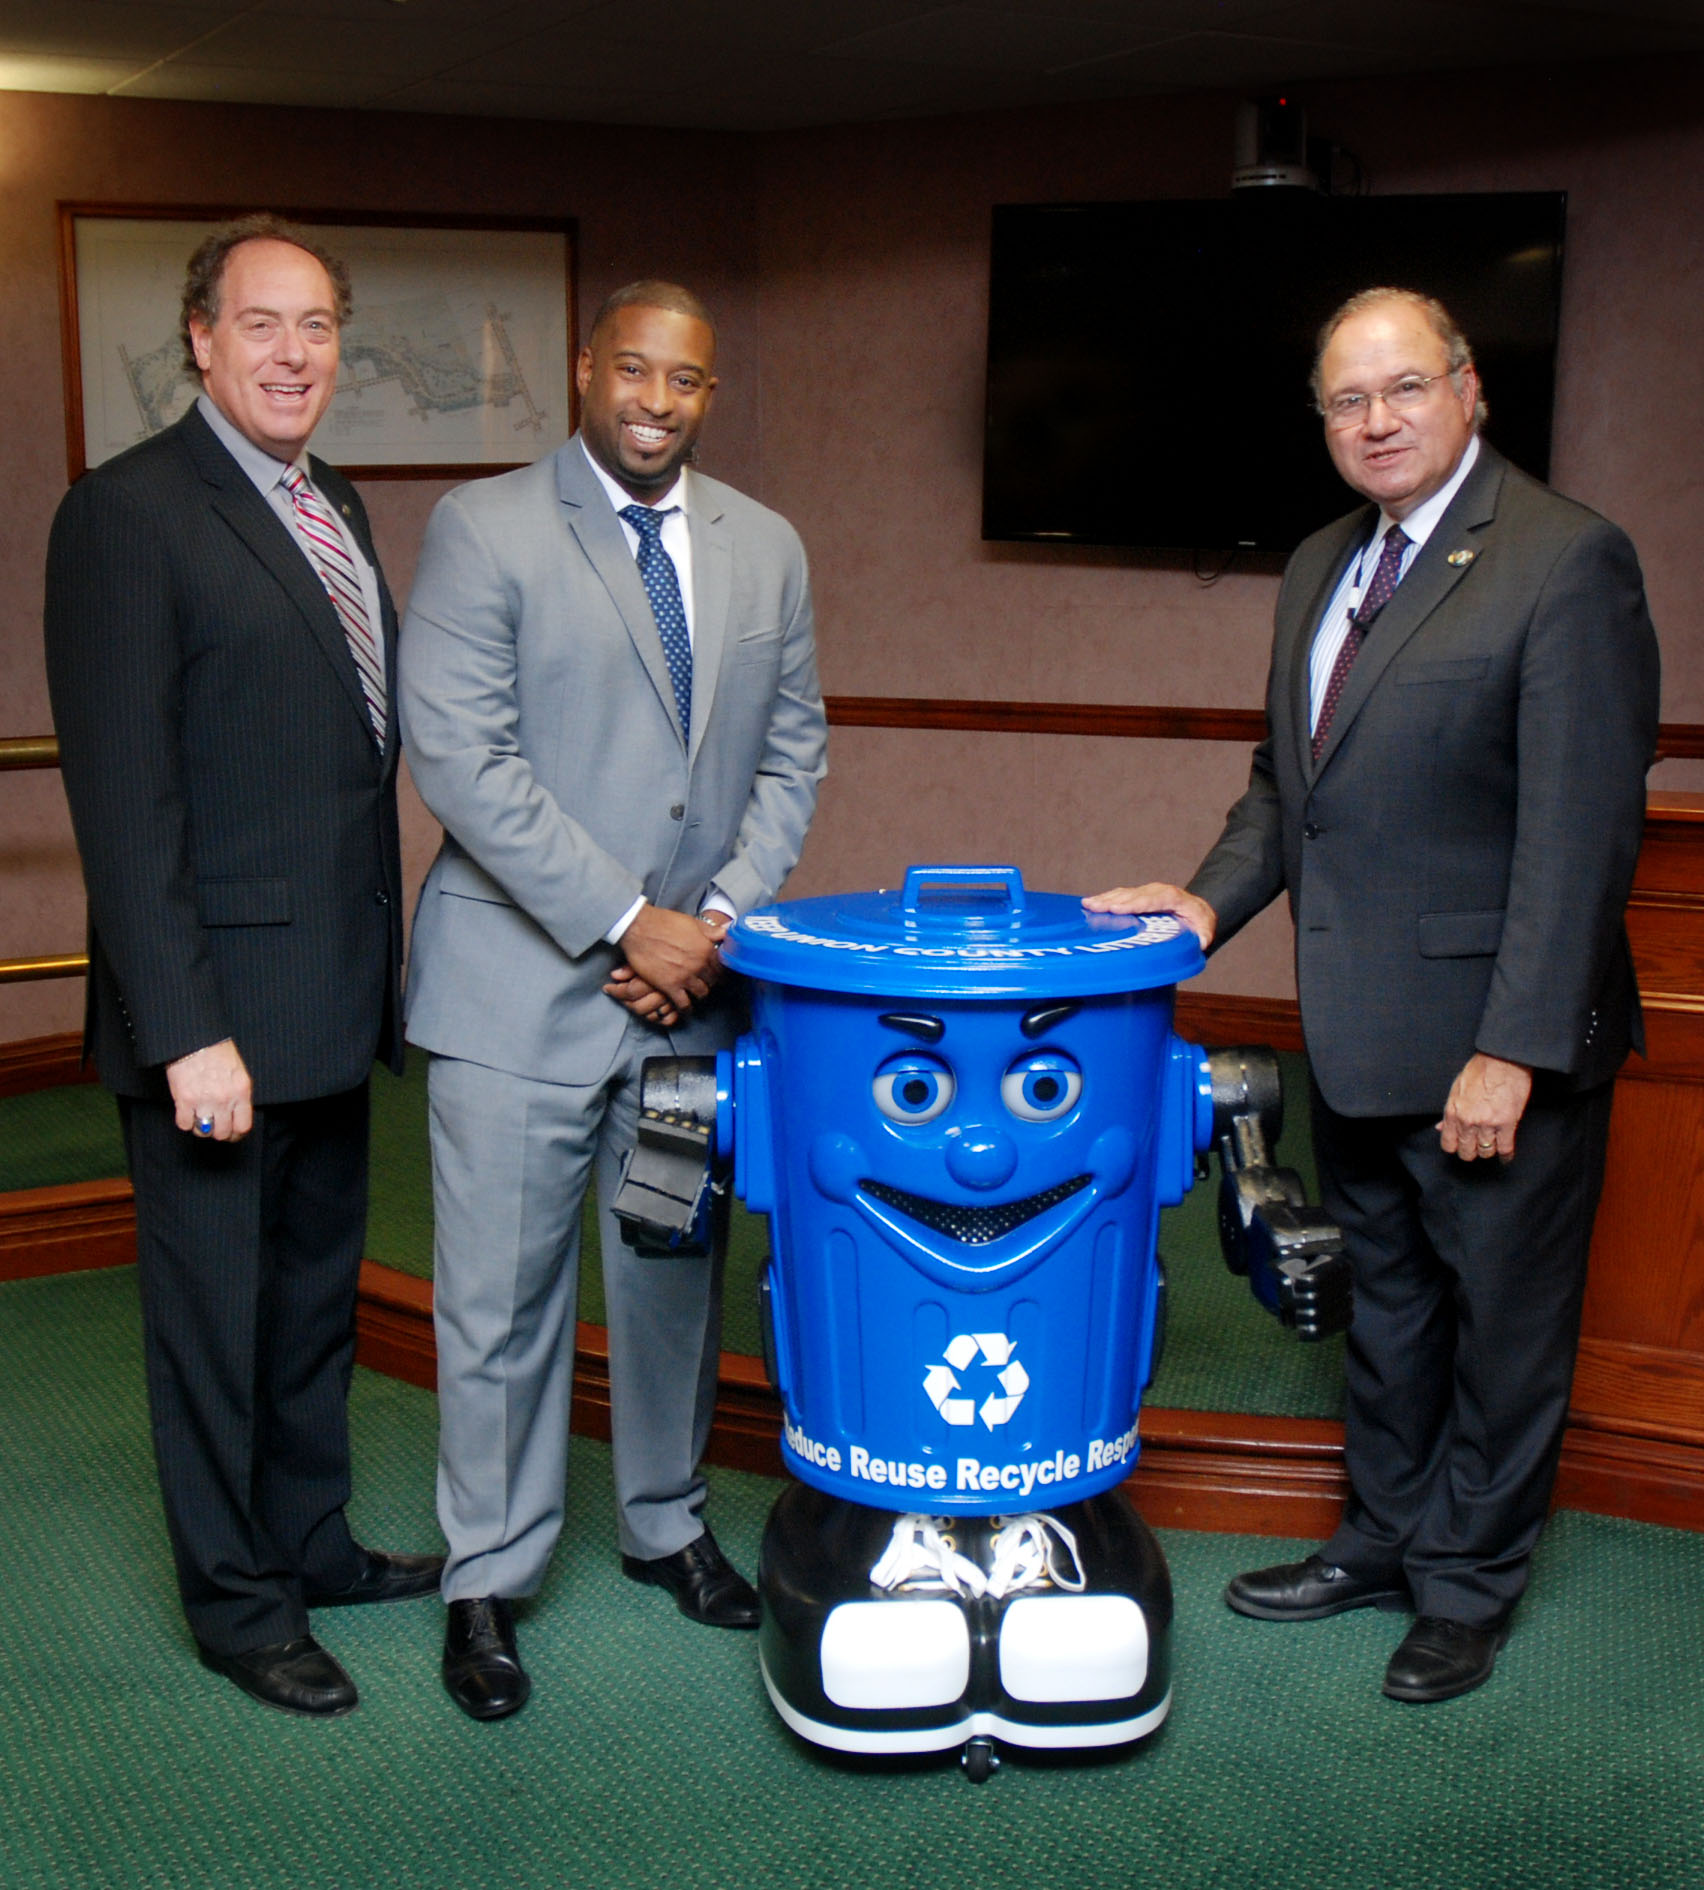 Union County Introduces New Recycling Robot County of Union